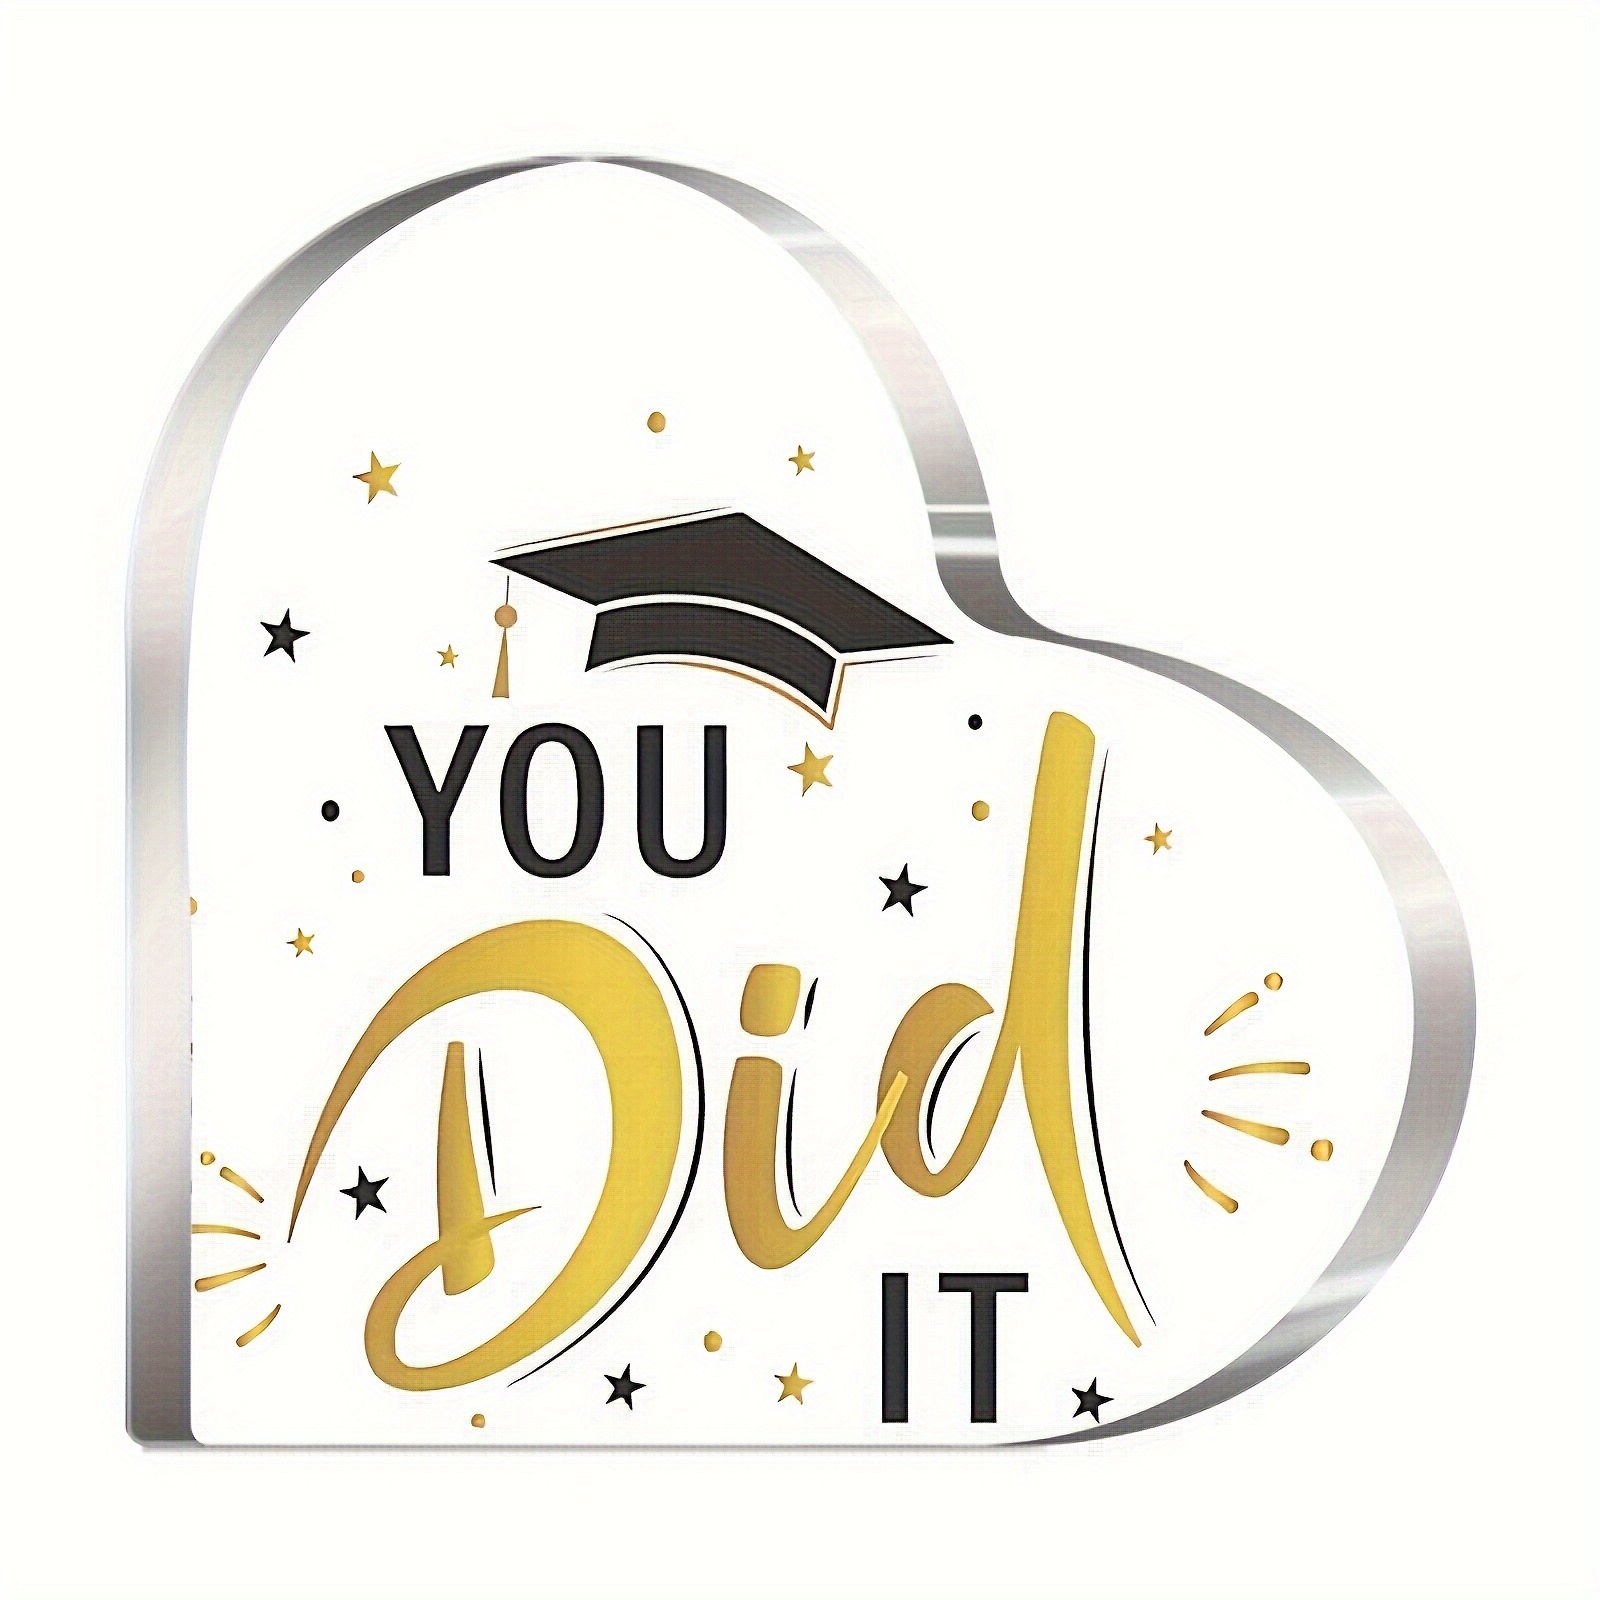 

1pc Heart-shaped Acrylic Graduation Gift, "you Did It" Congratulations Sign, Tabletop Stand Decor, Graduation Keepsake For Him Or Her